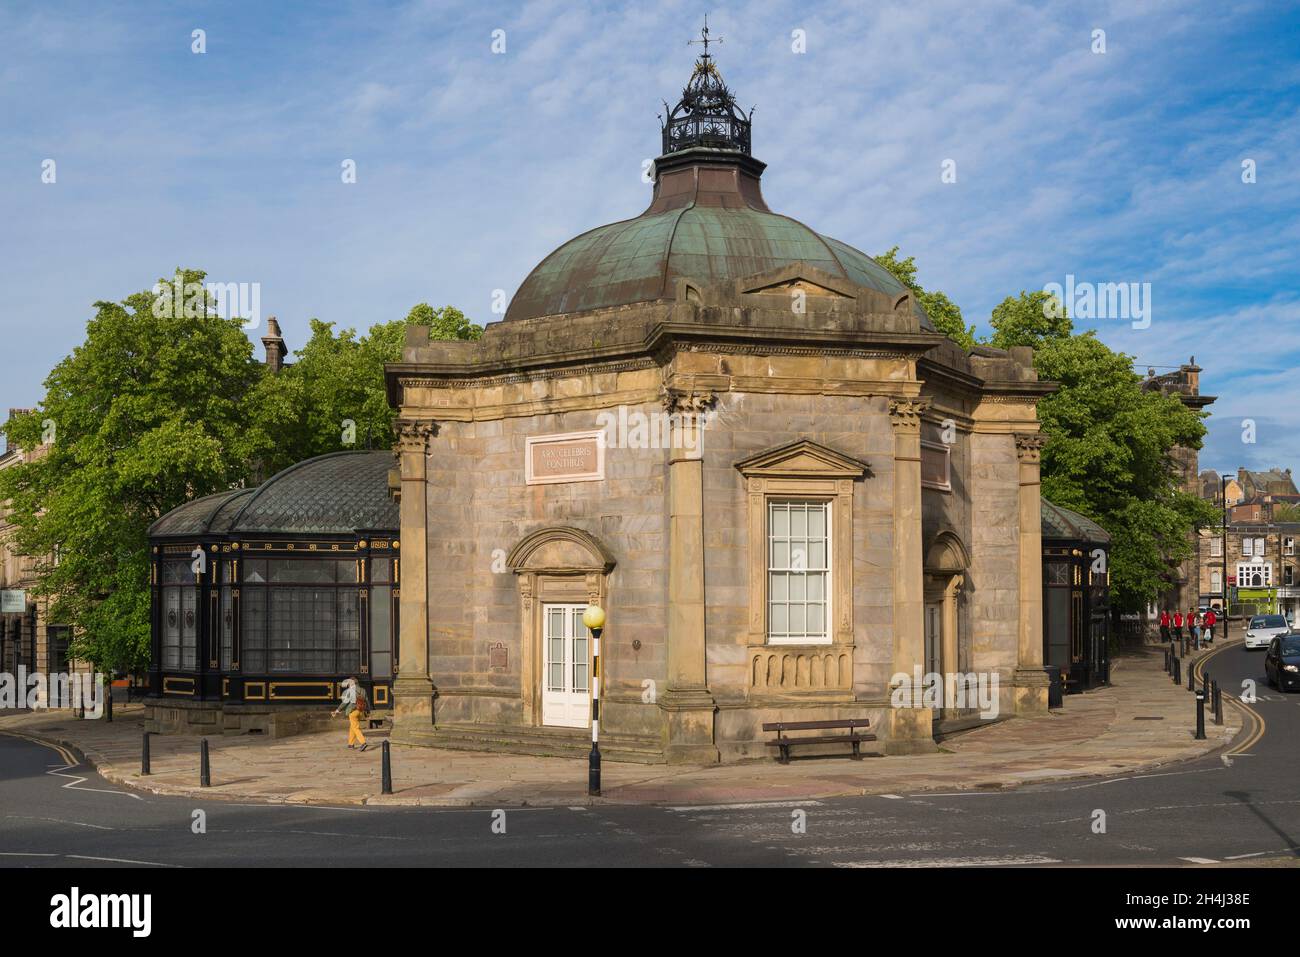 Harrogate Pump Room, view in summer of the octagonal Royal Pump Room (1842) and its iron and glass Museum building (1913), Harrogate, North Yorkshire Stock Photo